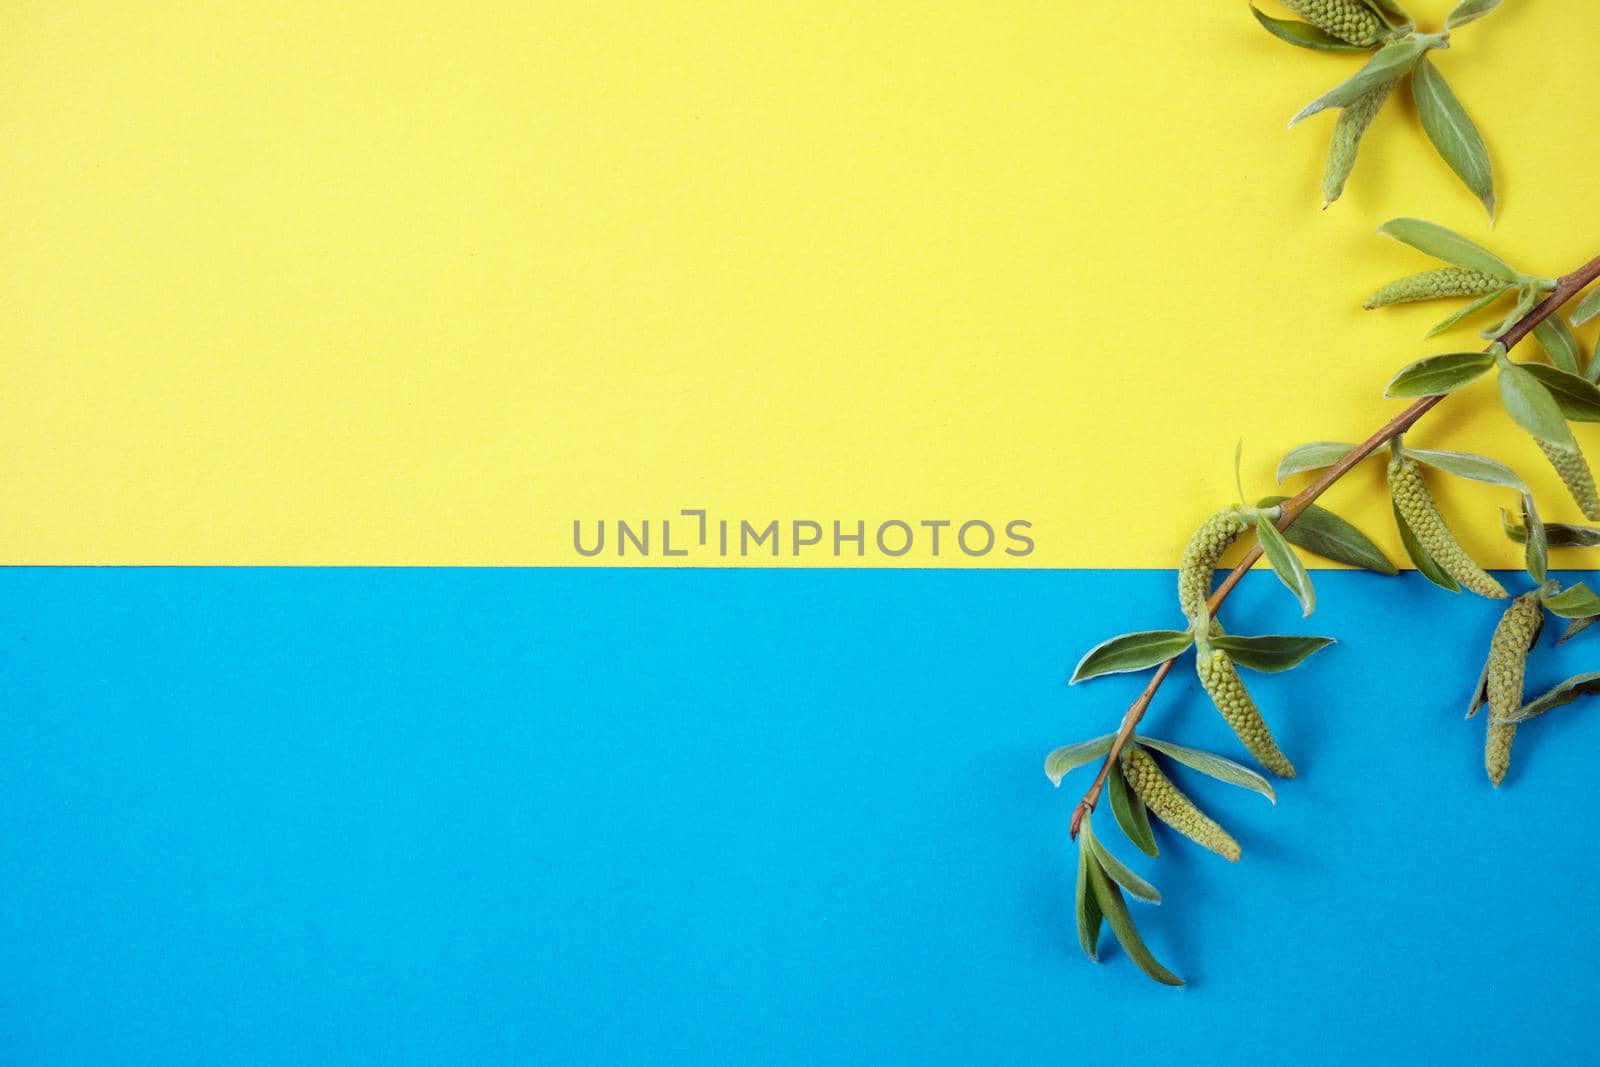 Spring flowers. Holiday card. White flowers of cherry on a blue and yellow background. Place for text, flat lay, top view, copy space